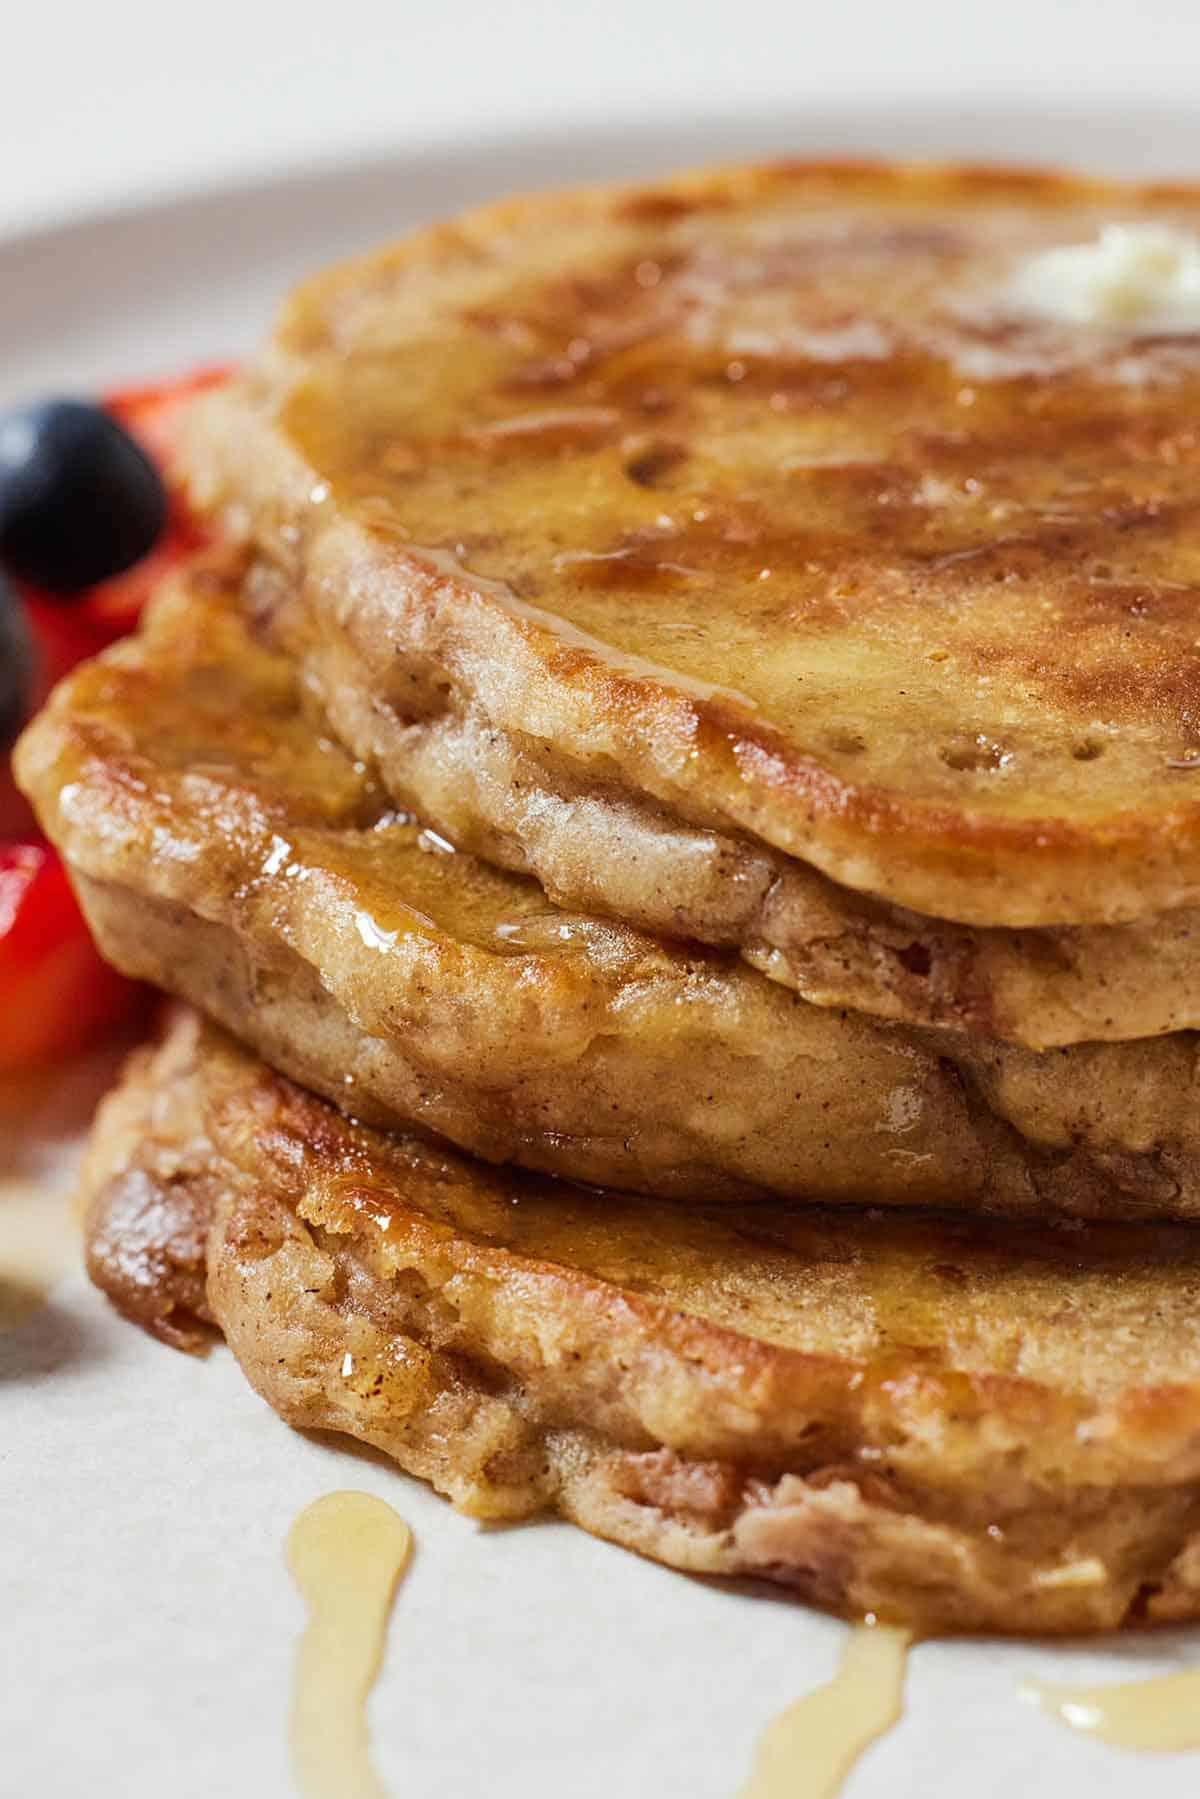 A profile view of a stack of three apple pancakes with syrup drizzled over.